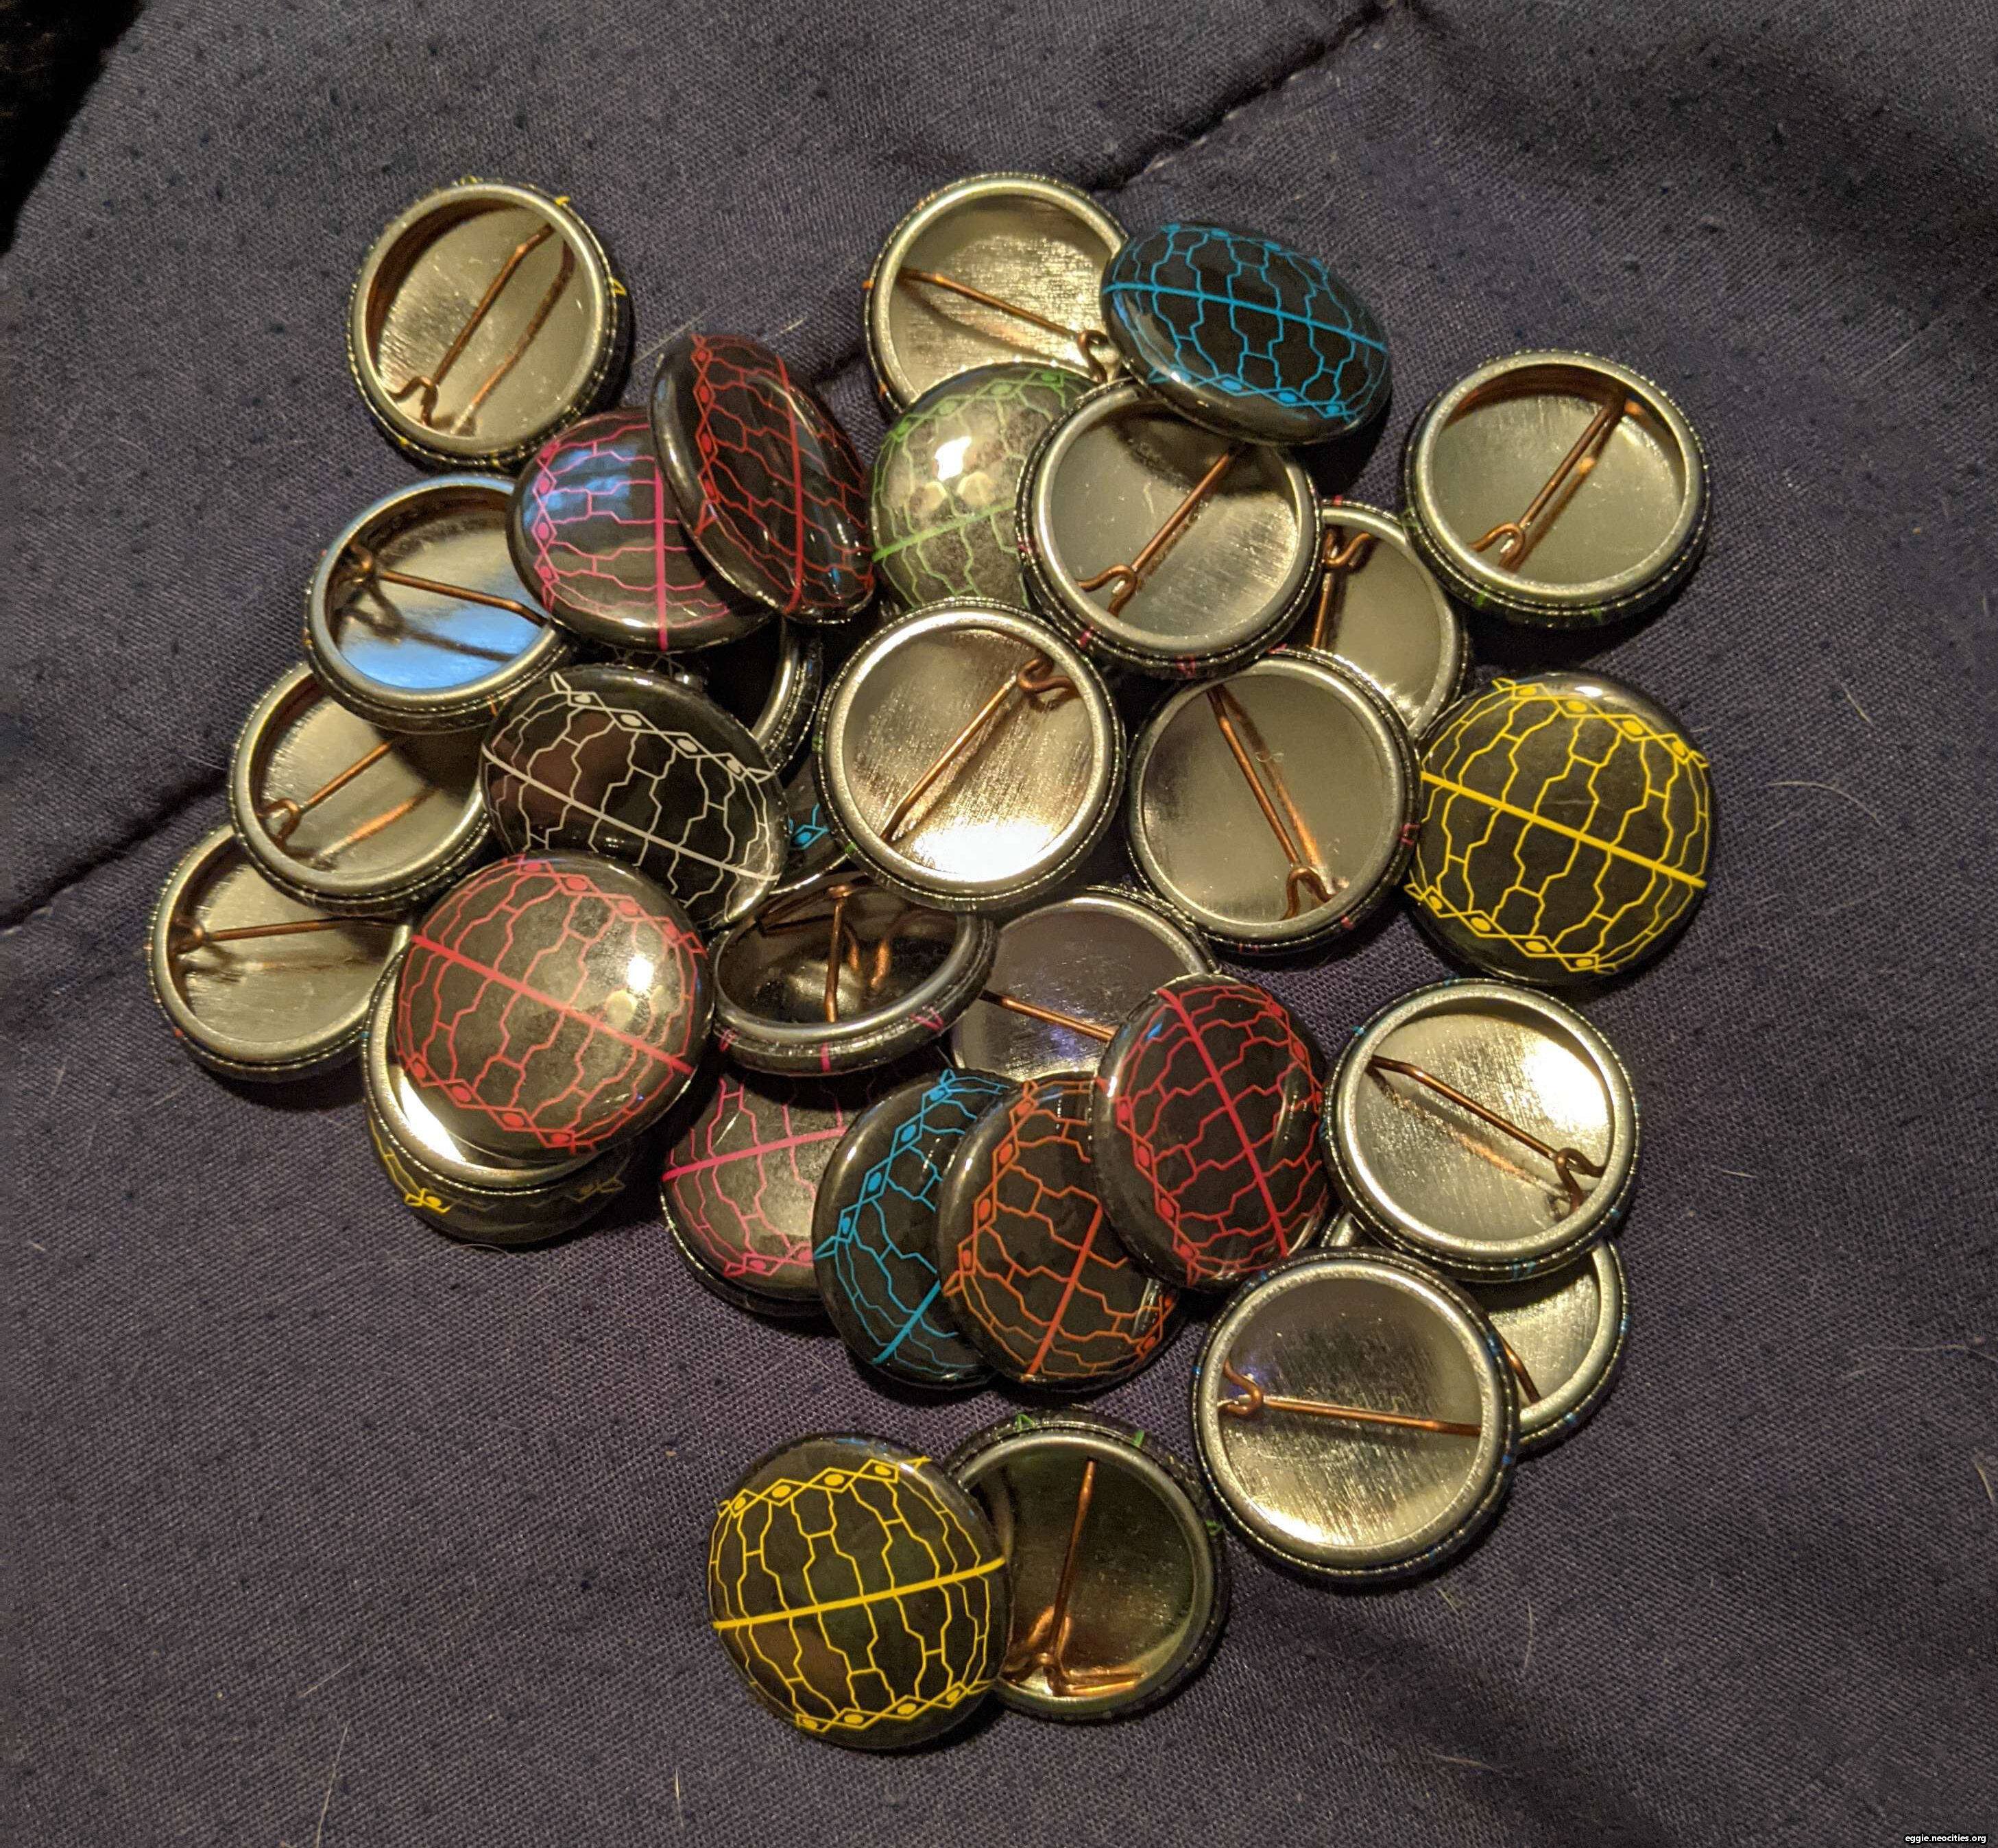 A pile of one inch circular metal pinback buttons. The featured design is an Allagan Companion Node minion in different colors.